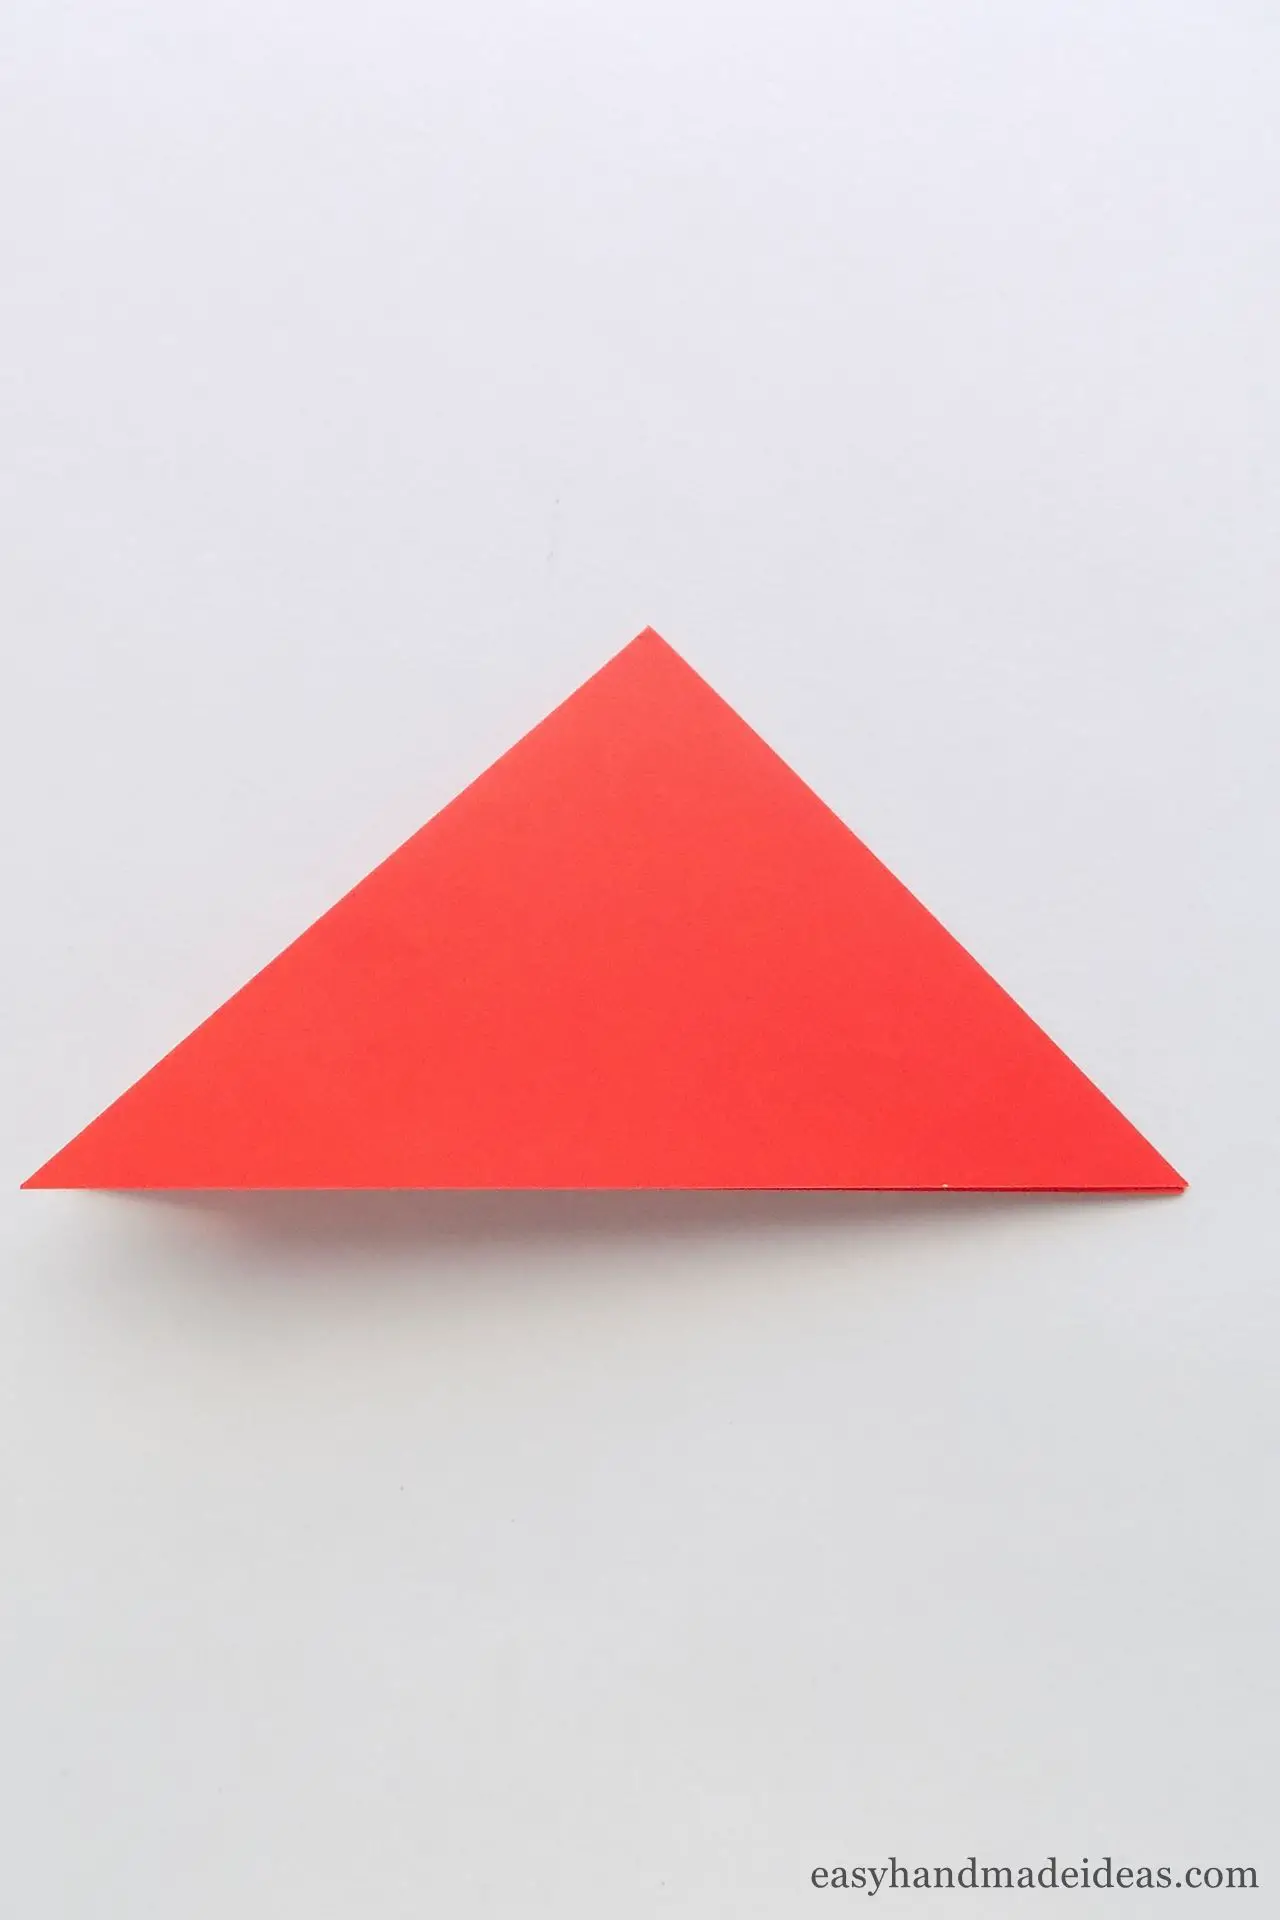 Unfold the triangle